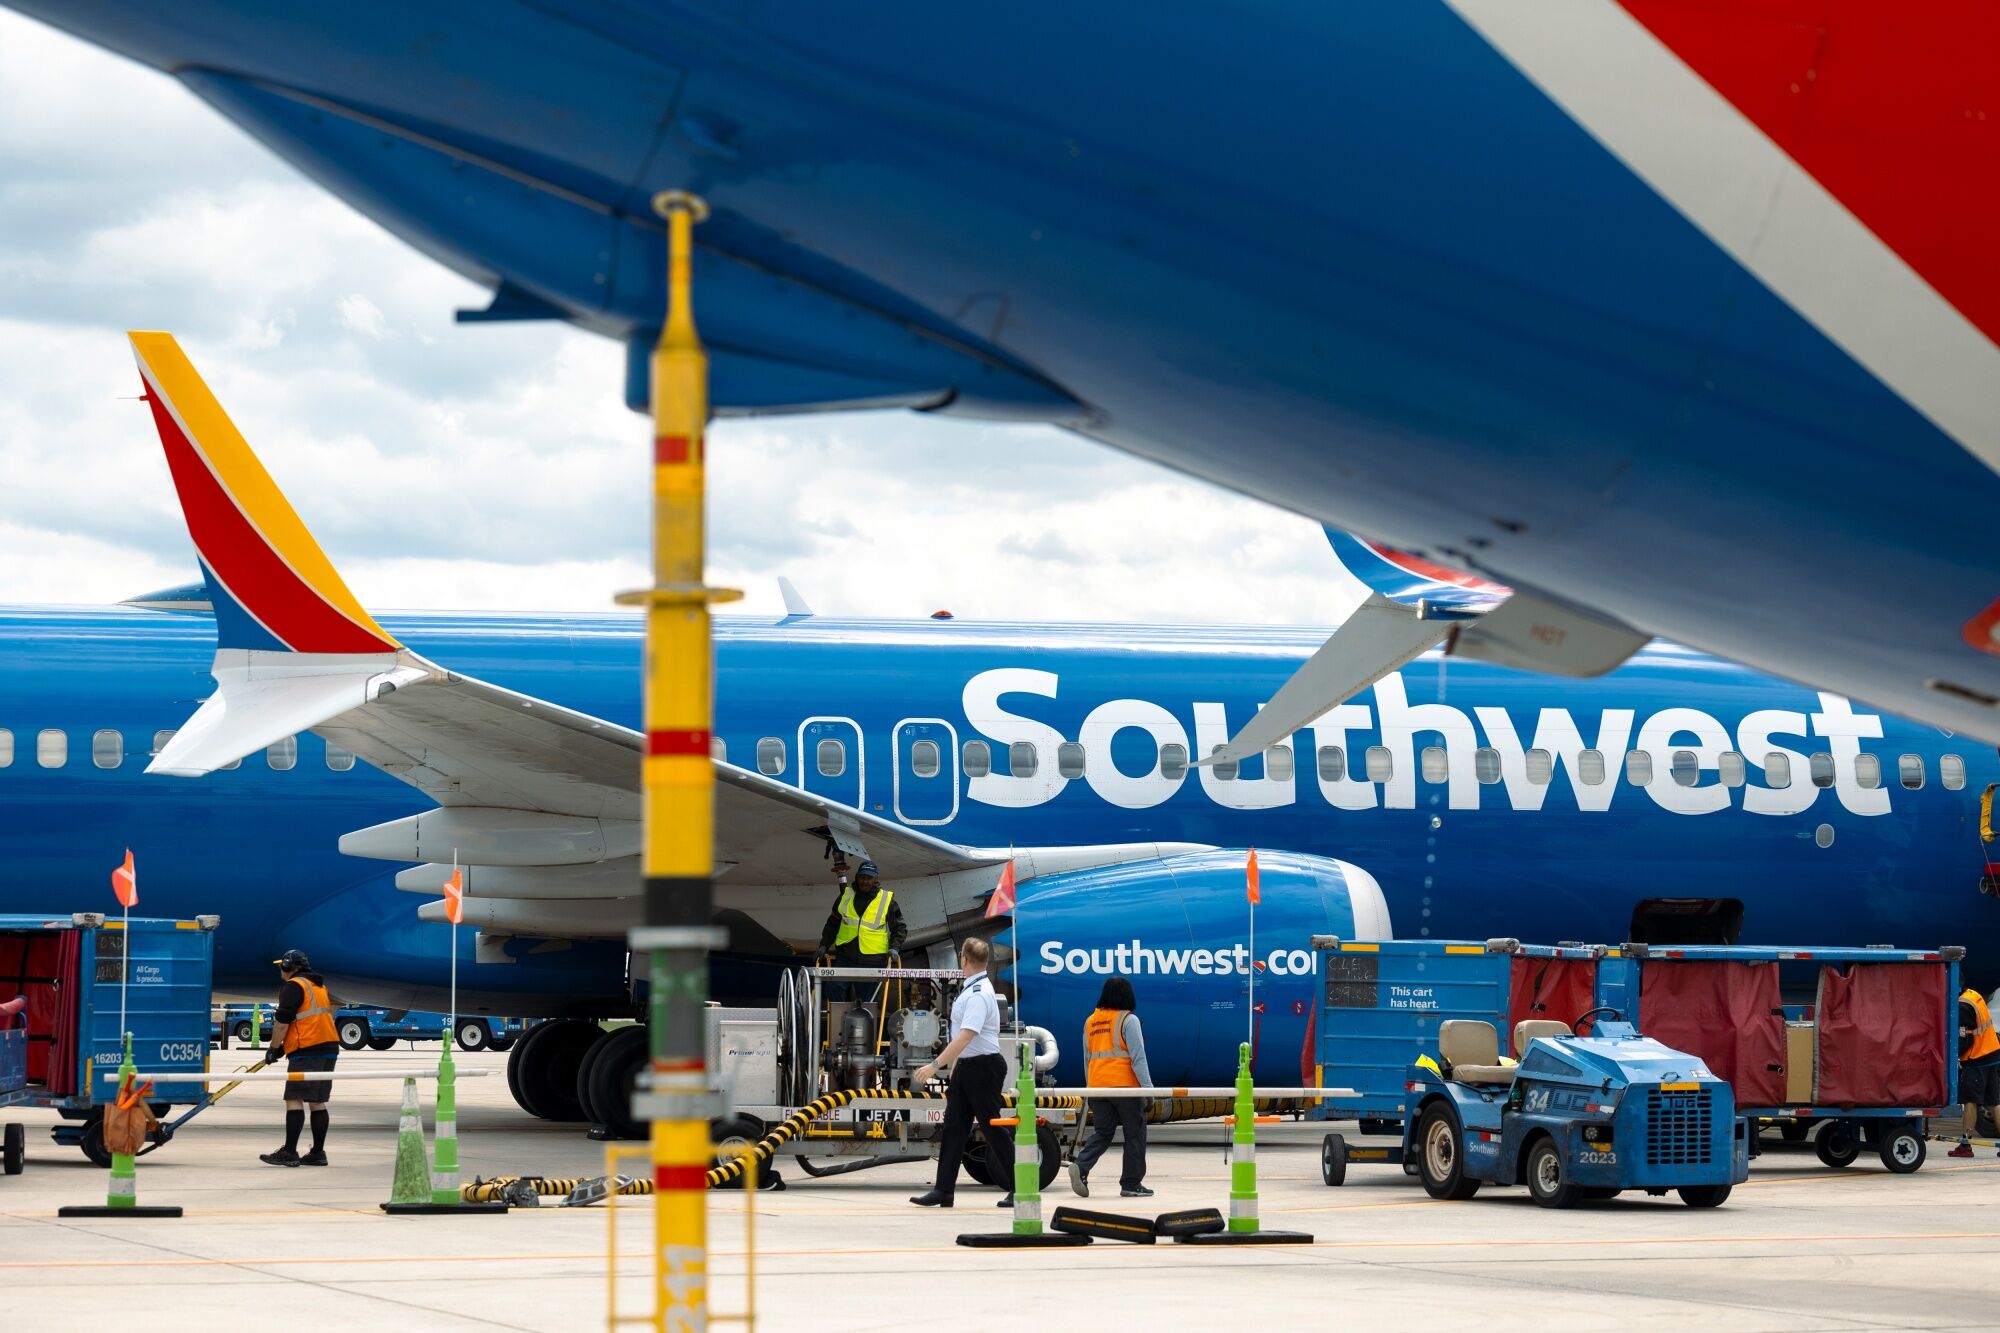 southwest air pulls out of four airports in growth slowdown